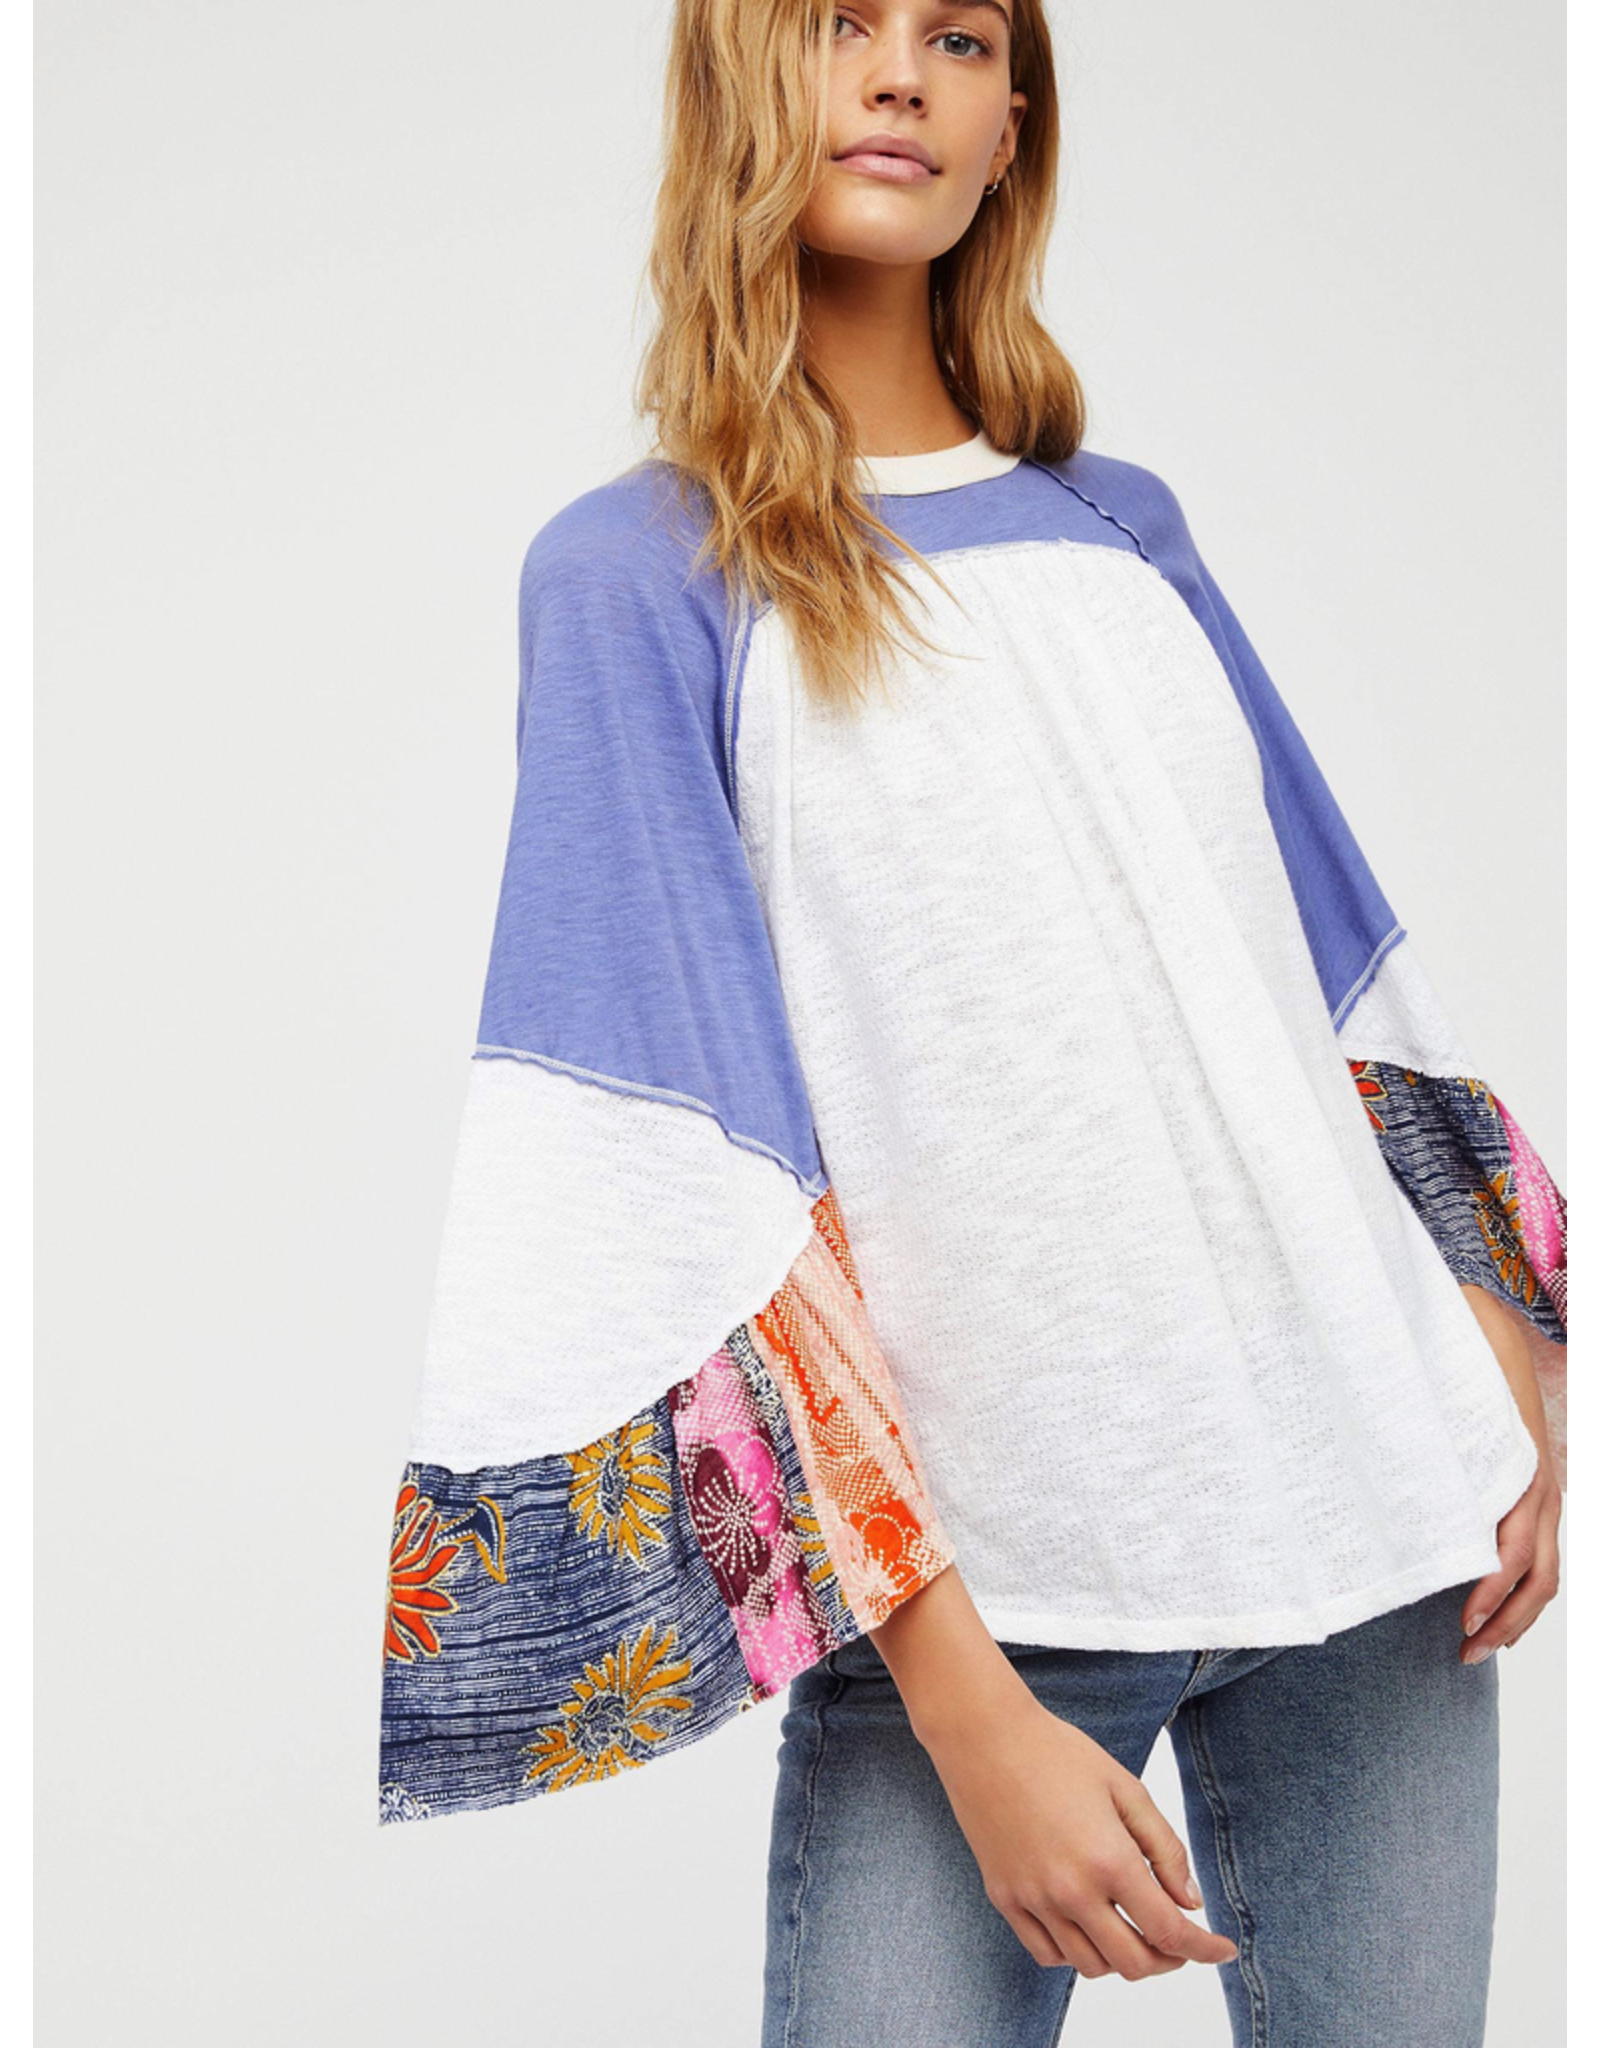 Free People FRIDAY FEVER TOP